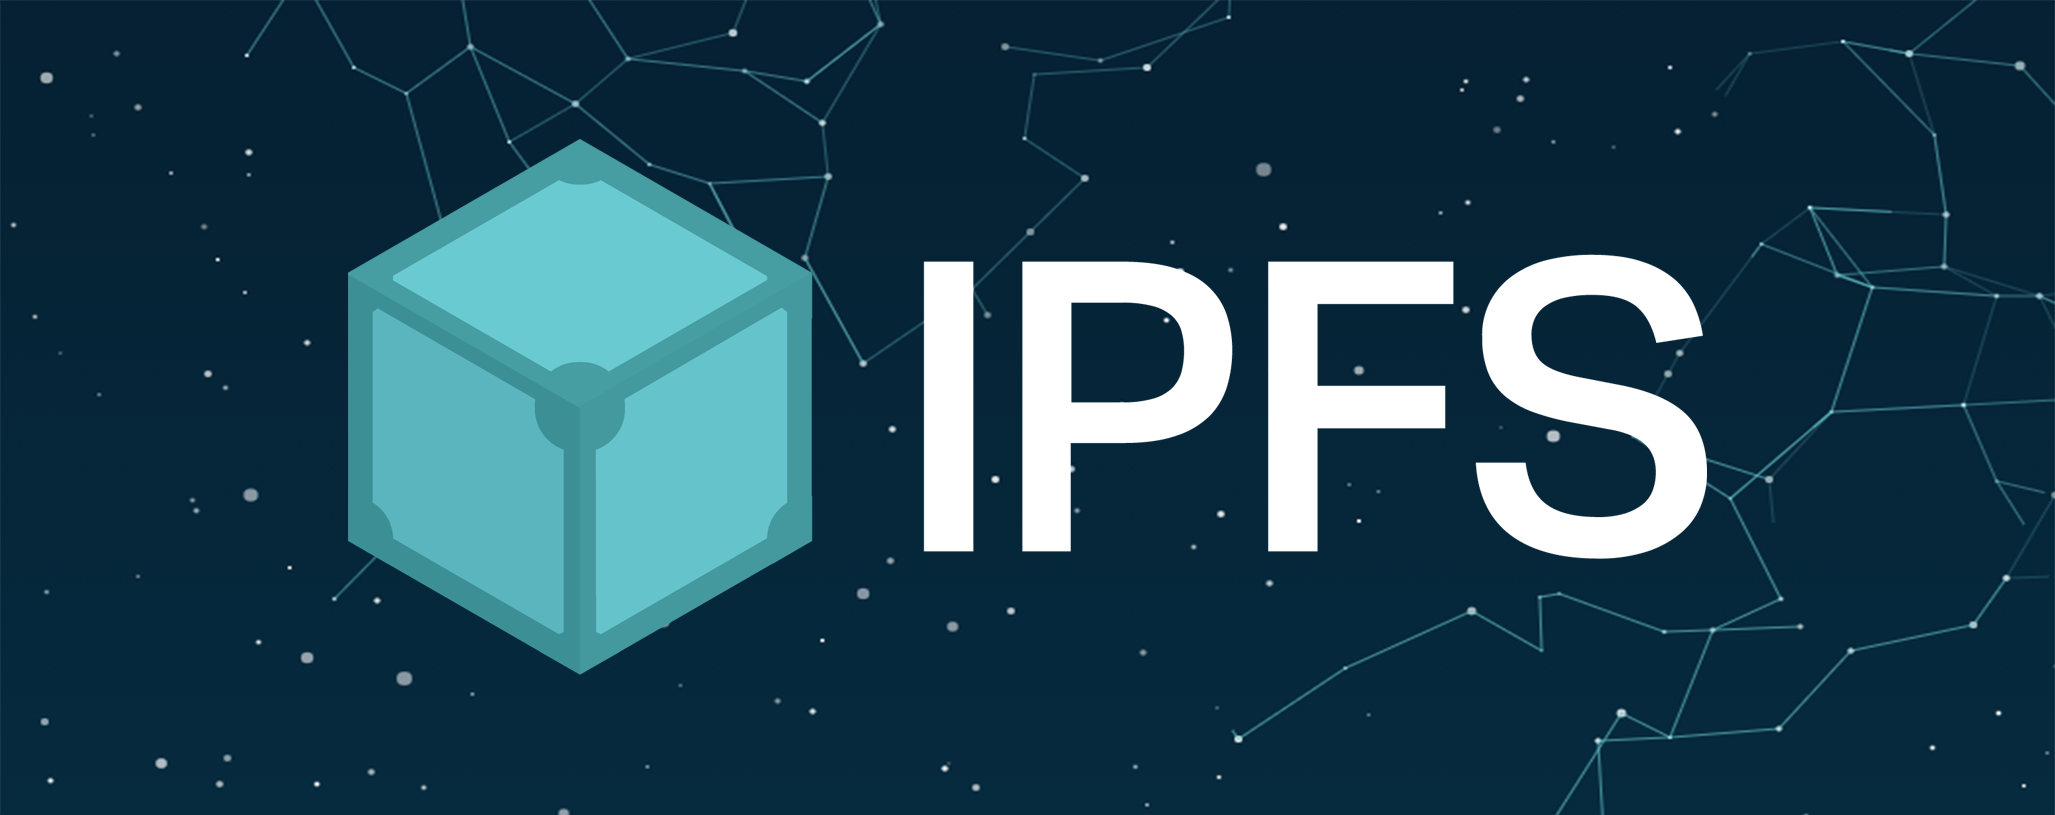 /posts/tutorials/p2p/ipfs-easy-use/ipfs-logo.png